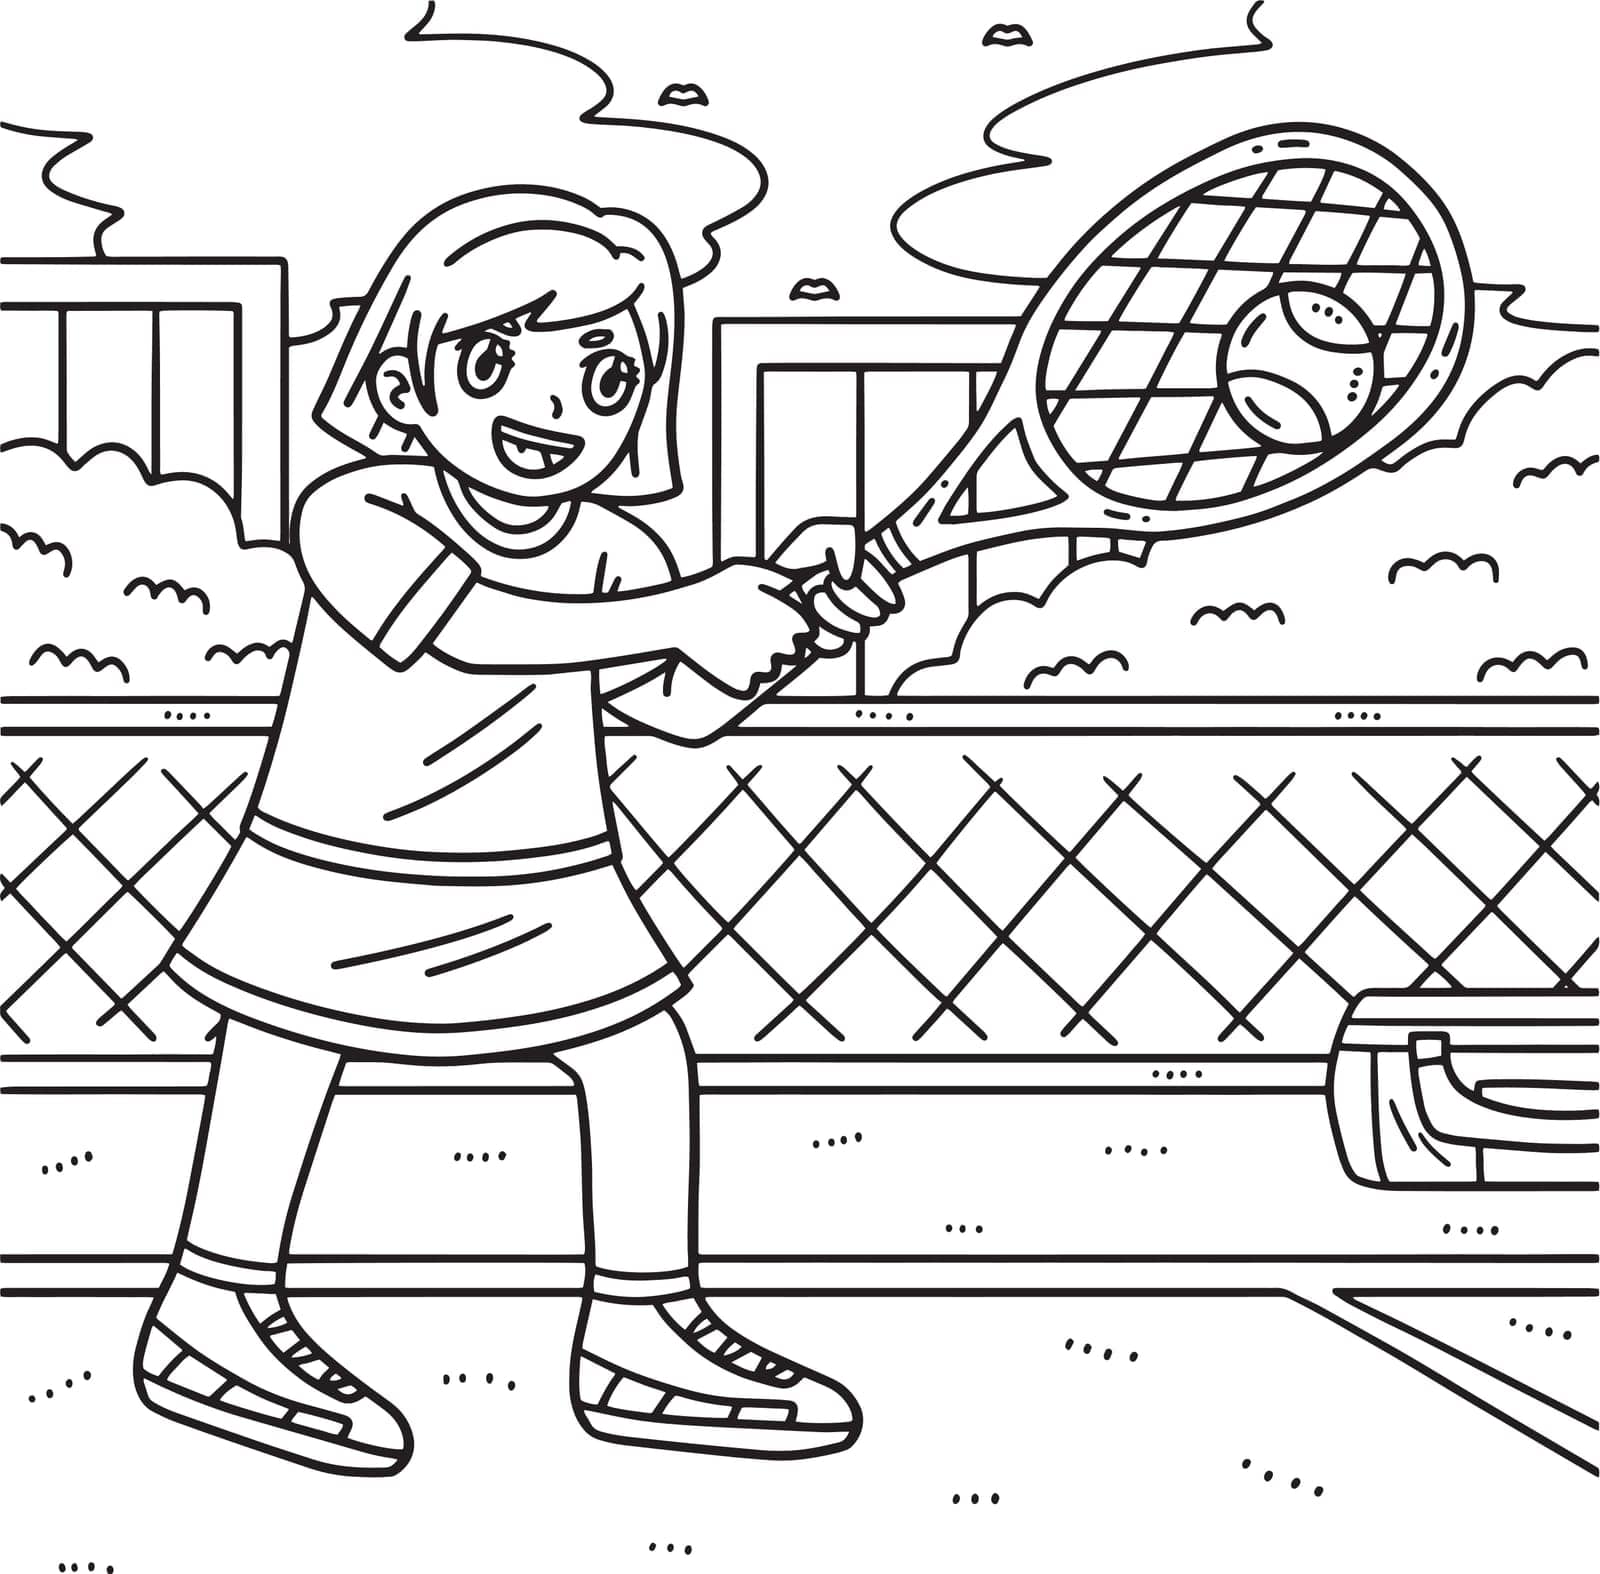 Tennis Female Player Hitting a Ball Coloring Page by abbydesign